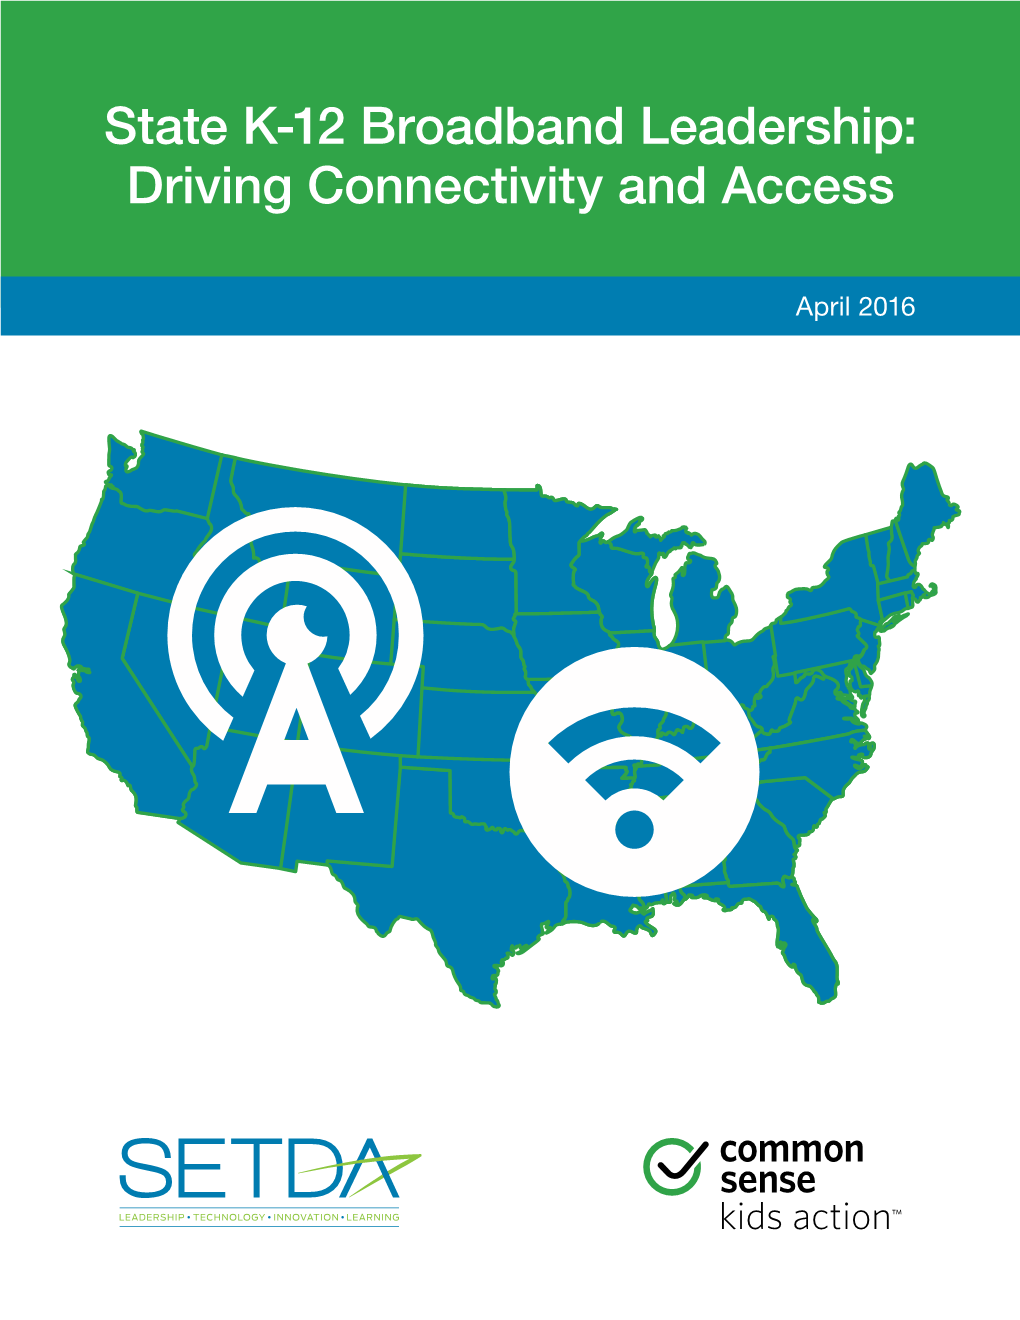 State K-12 Broadband Leadership: Driving Connectivity and Access